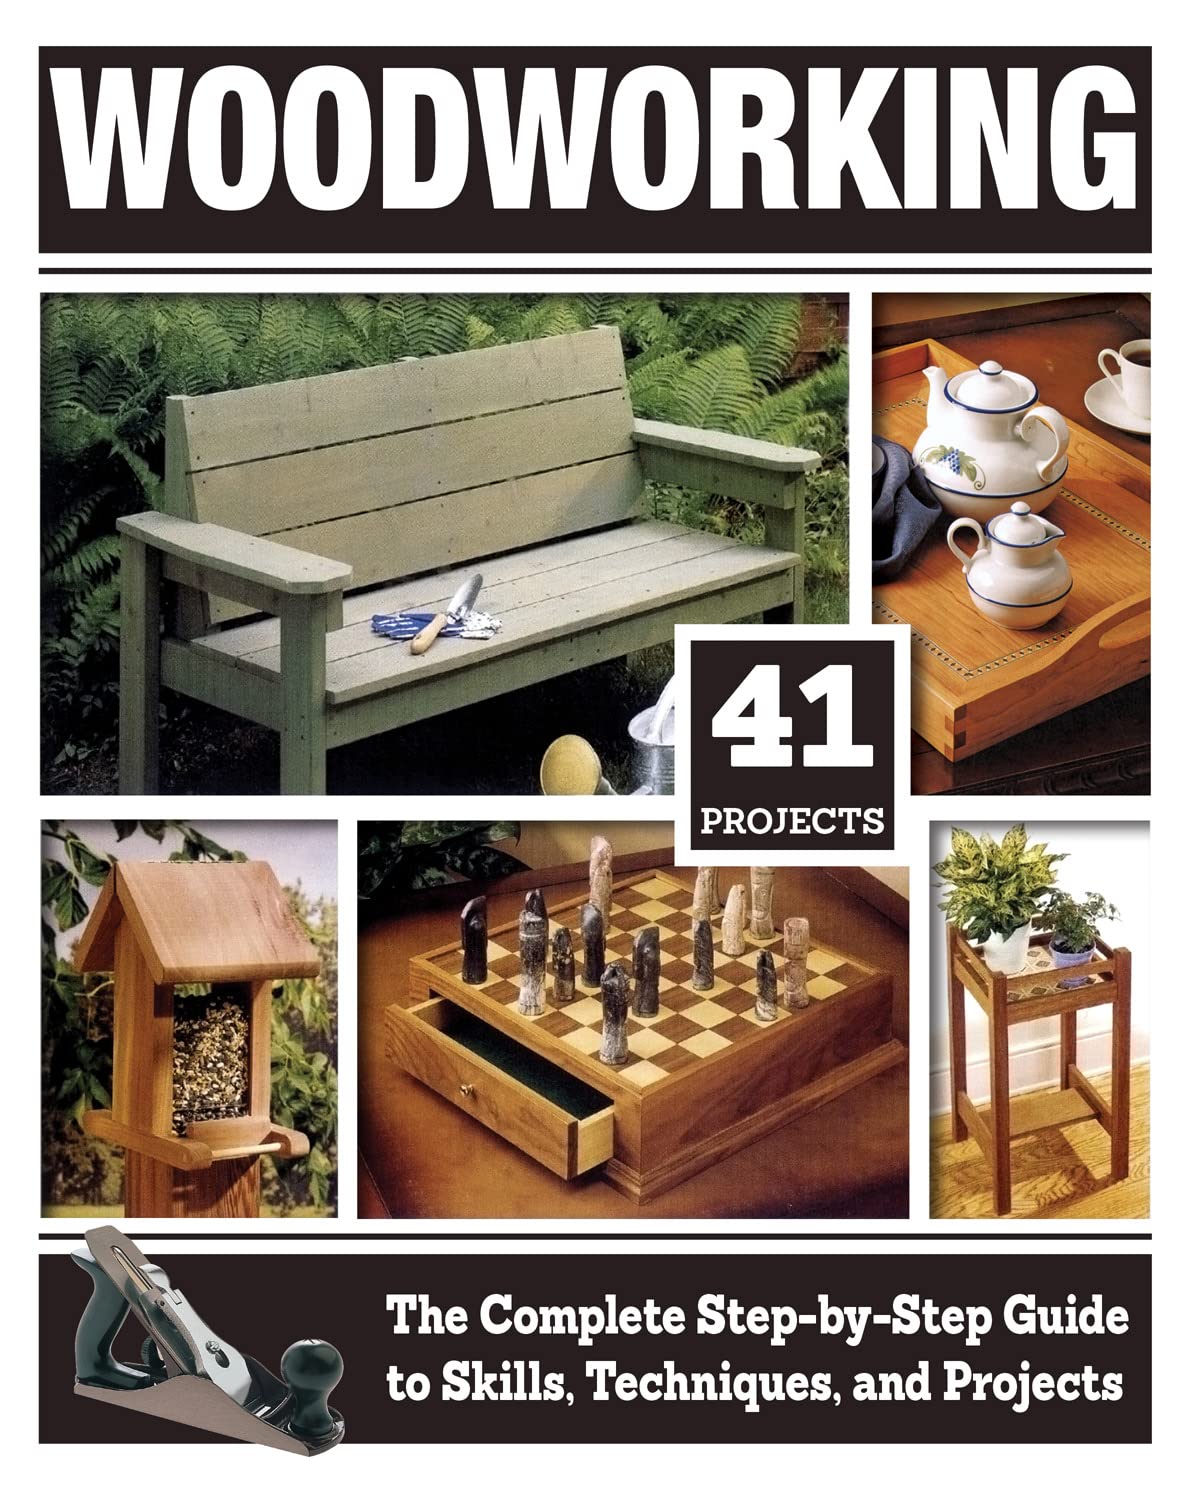 Woodworking: The Complete Step-by-Step Guide to Skills, Techniques, and Projects (Fox Chapel Publishing) Over 1,200 Photos & Illustrations, 41